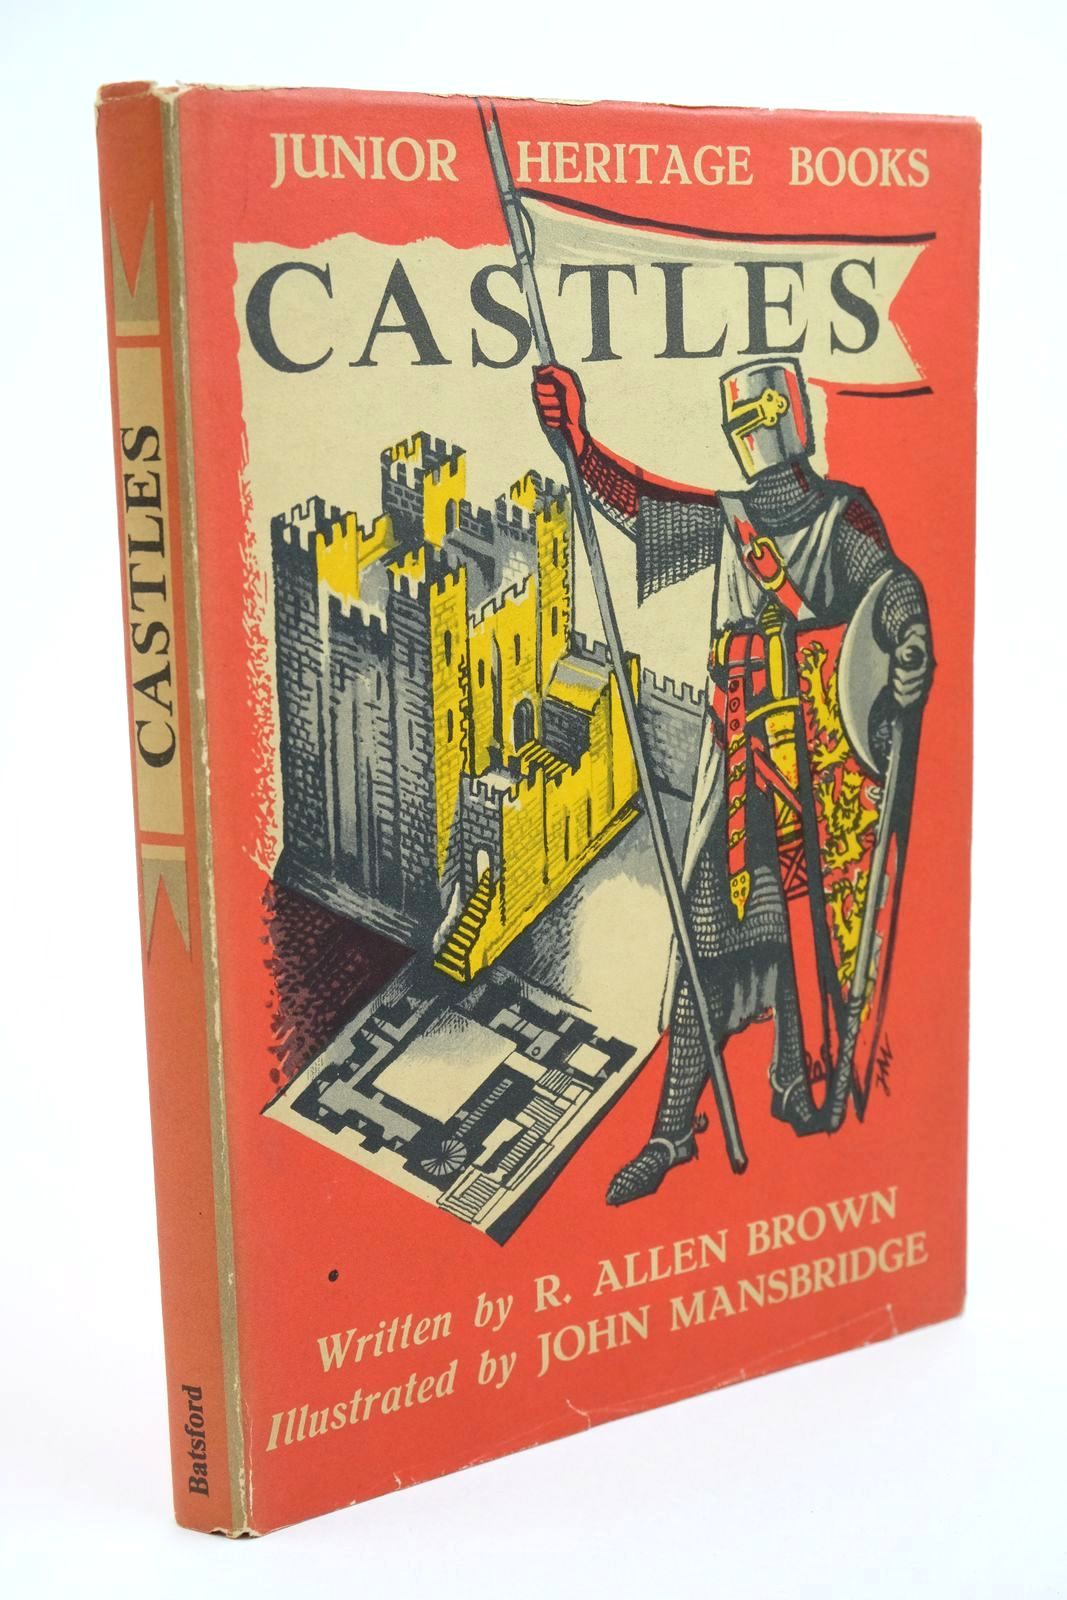 Photo of CASTLES written by Brown, R. Allen illustrated by Mansbridge, John published by B.T. Batsford Ltd. (STOCK CODE: 1323244)  for sale by Stella & Rose's Books